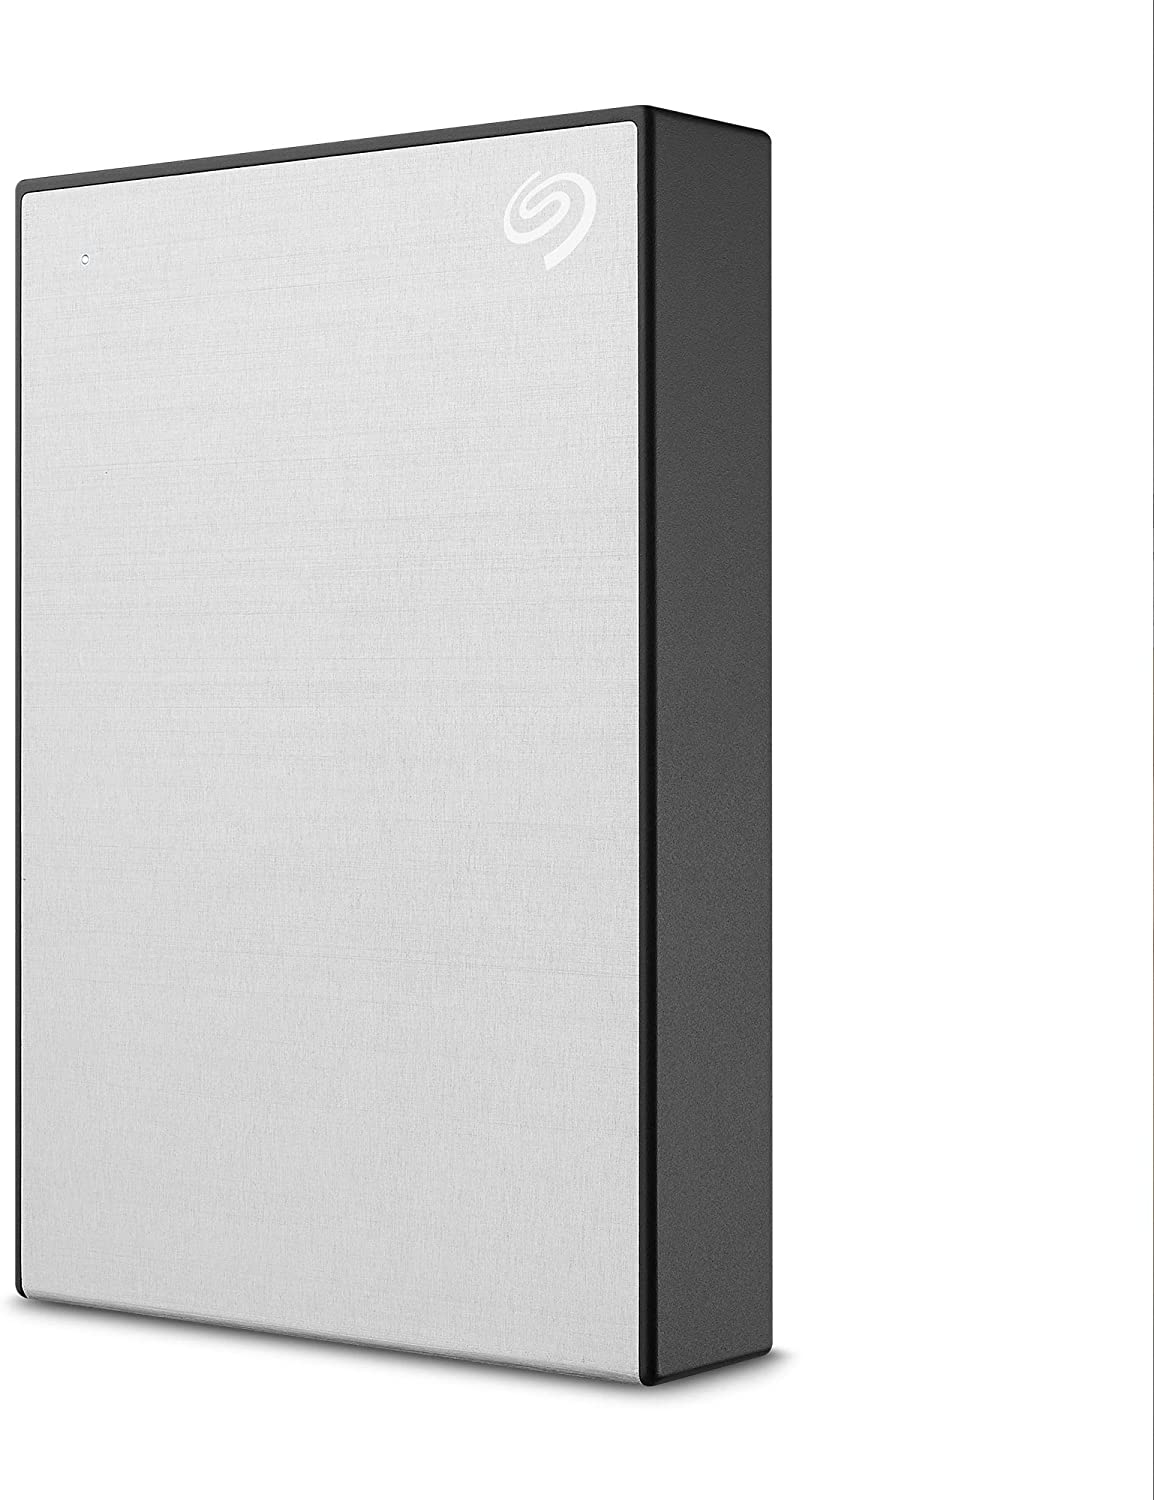 Hard disk extern seagate one touch 5tb usb 3.0 silver